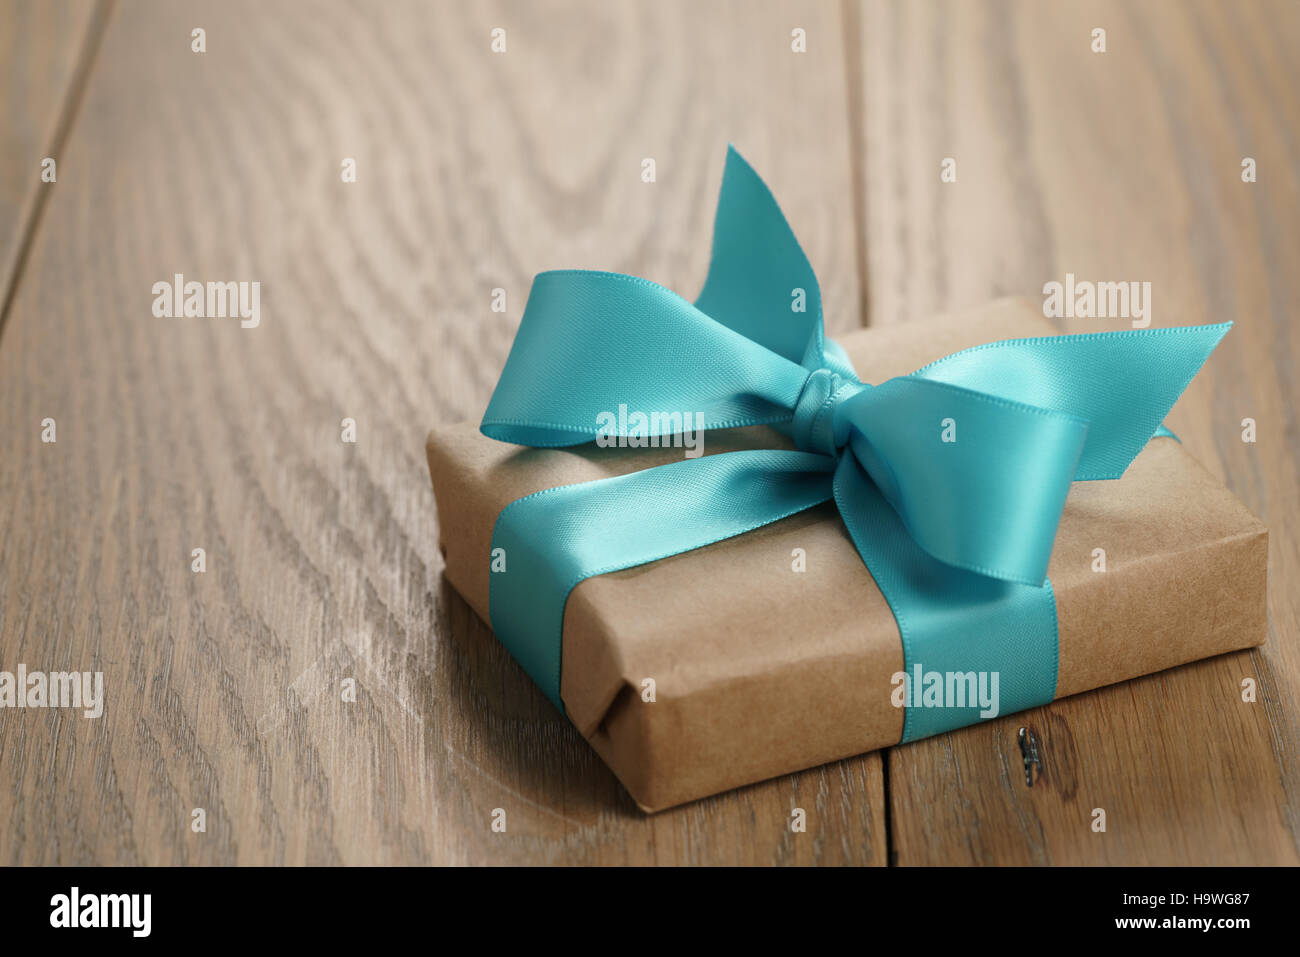 rustic craft paper gift box with blue ribbon bow on wood table Stock Photo